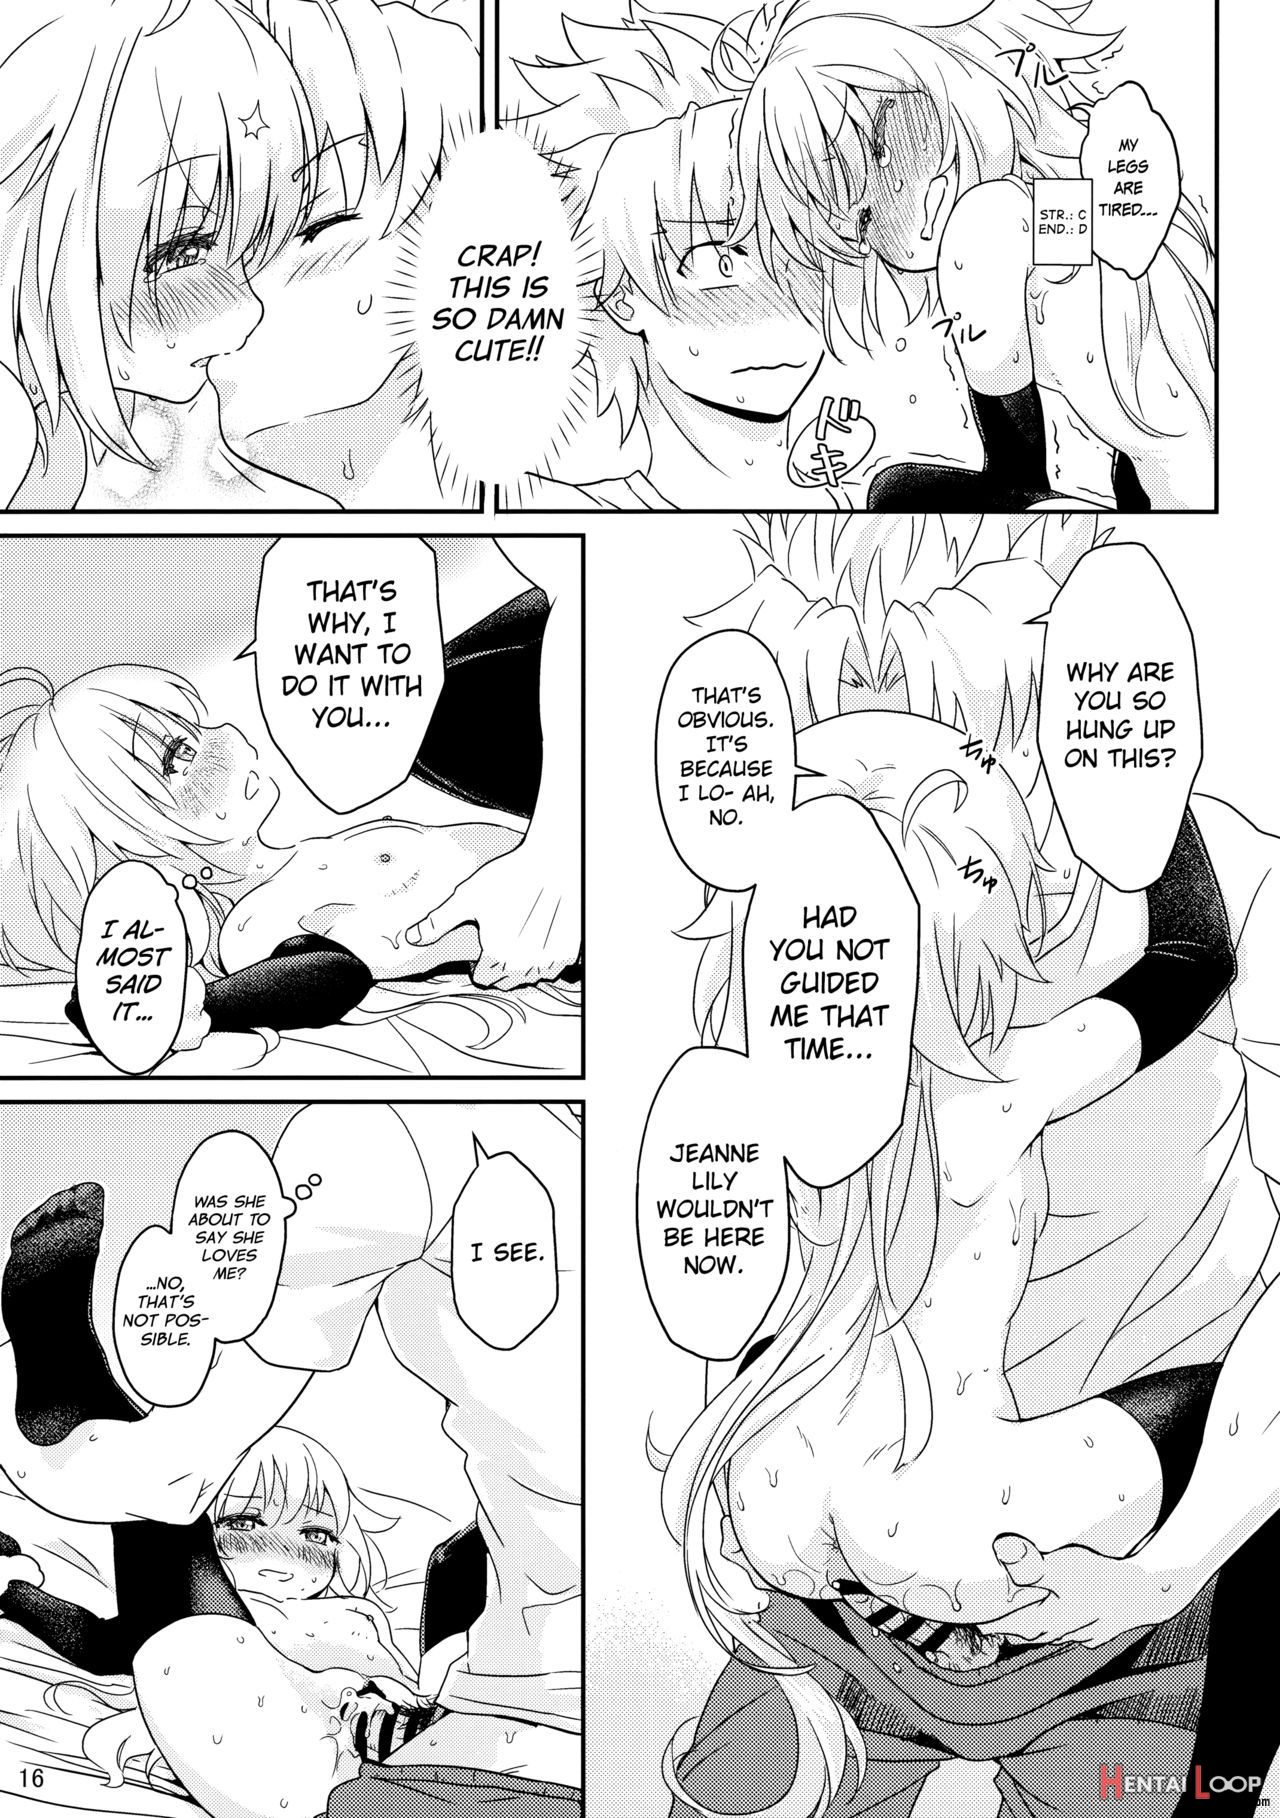 Jeanne Lily Is A Good Girl? page 17